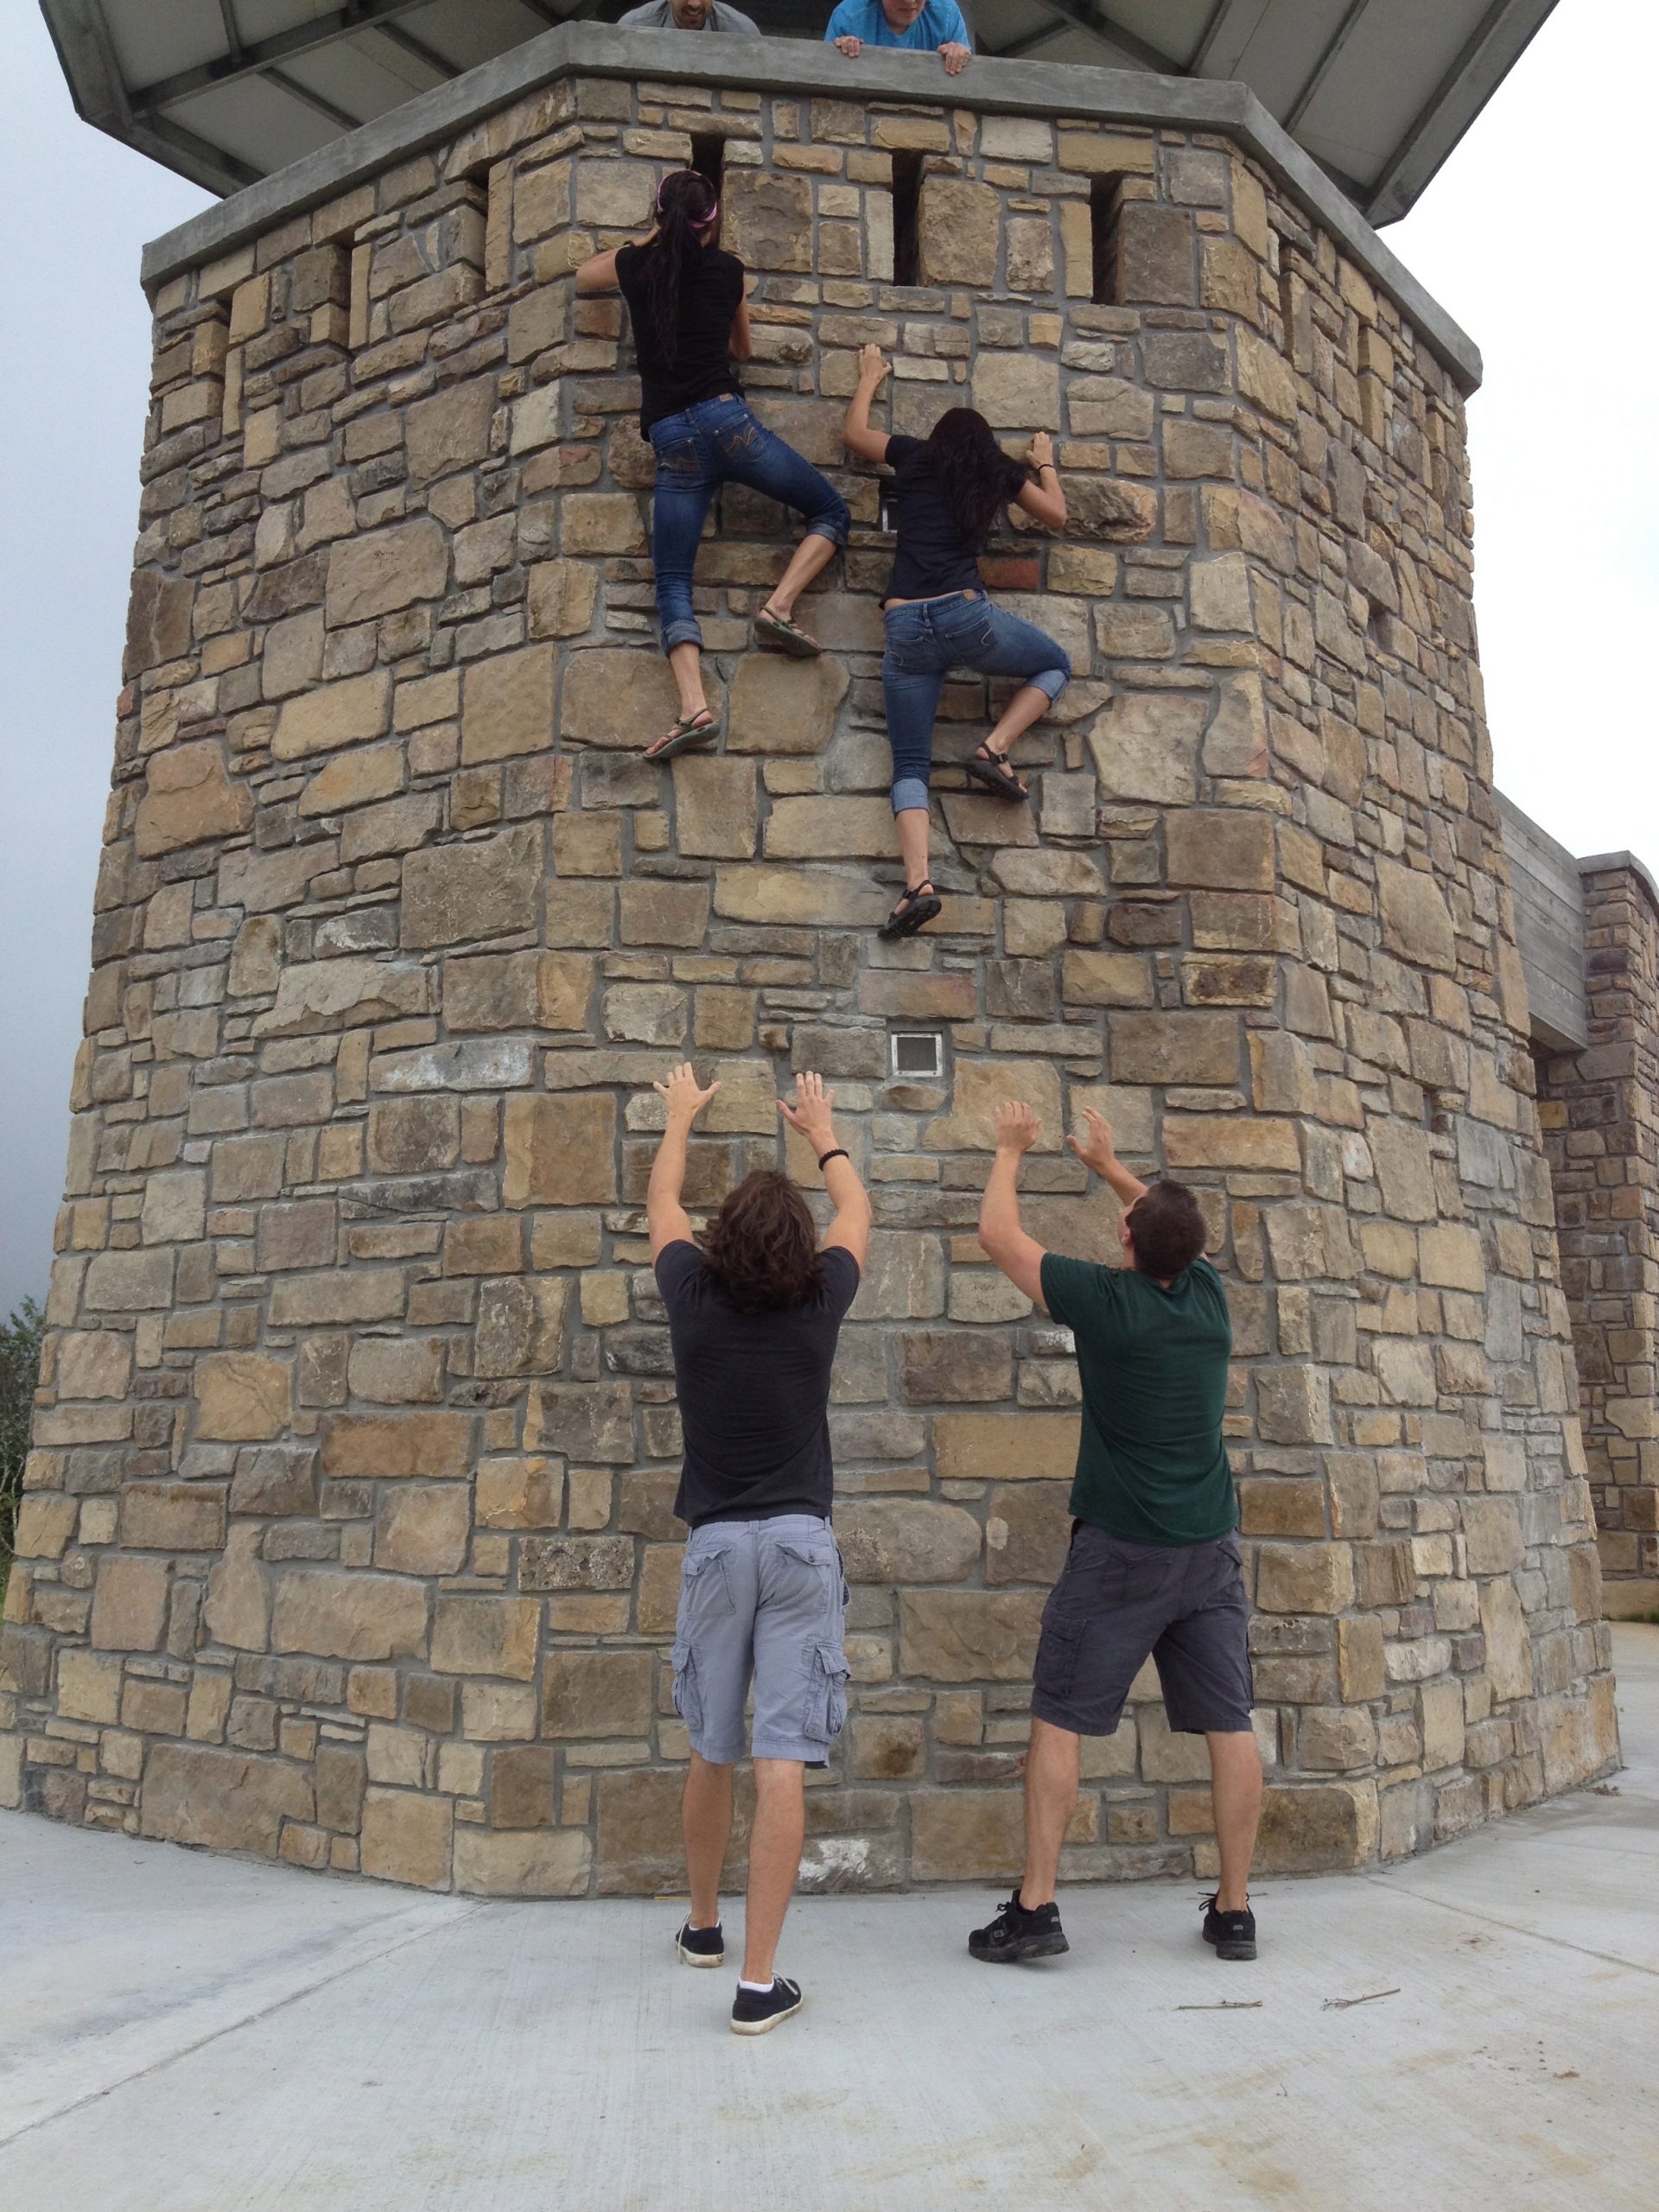 Us girls free climbing the tower while the guys spot us.